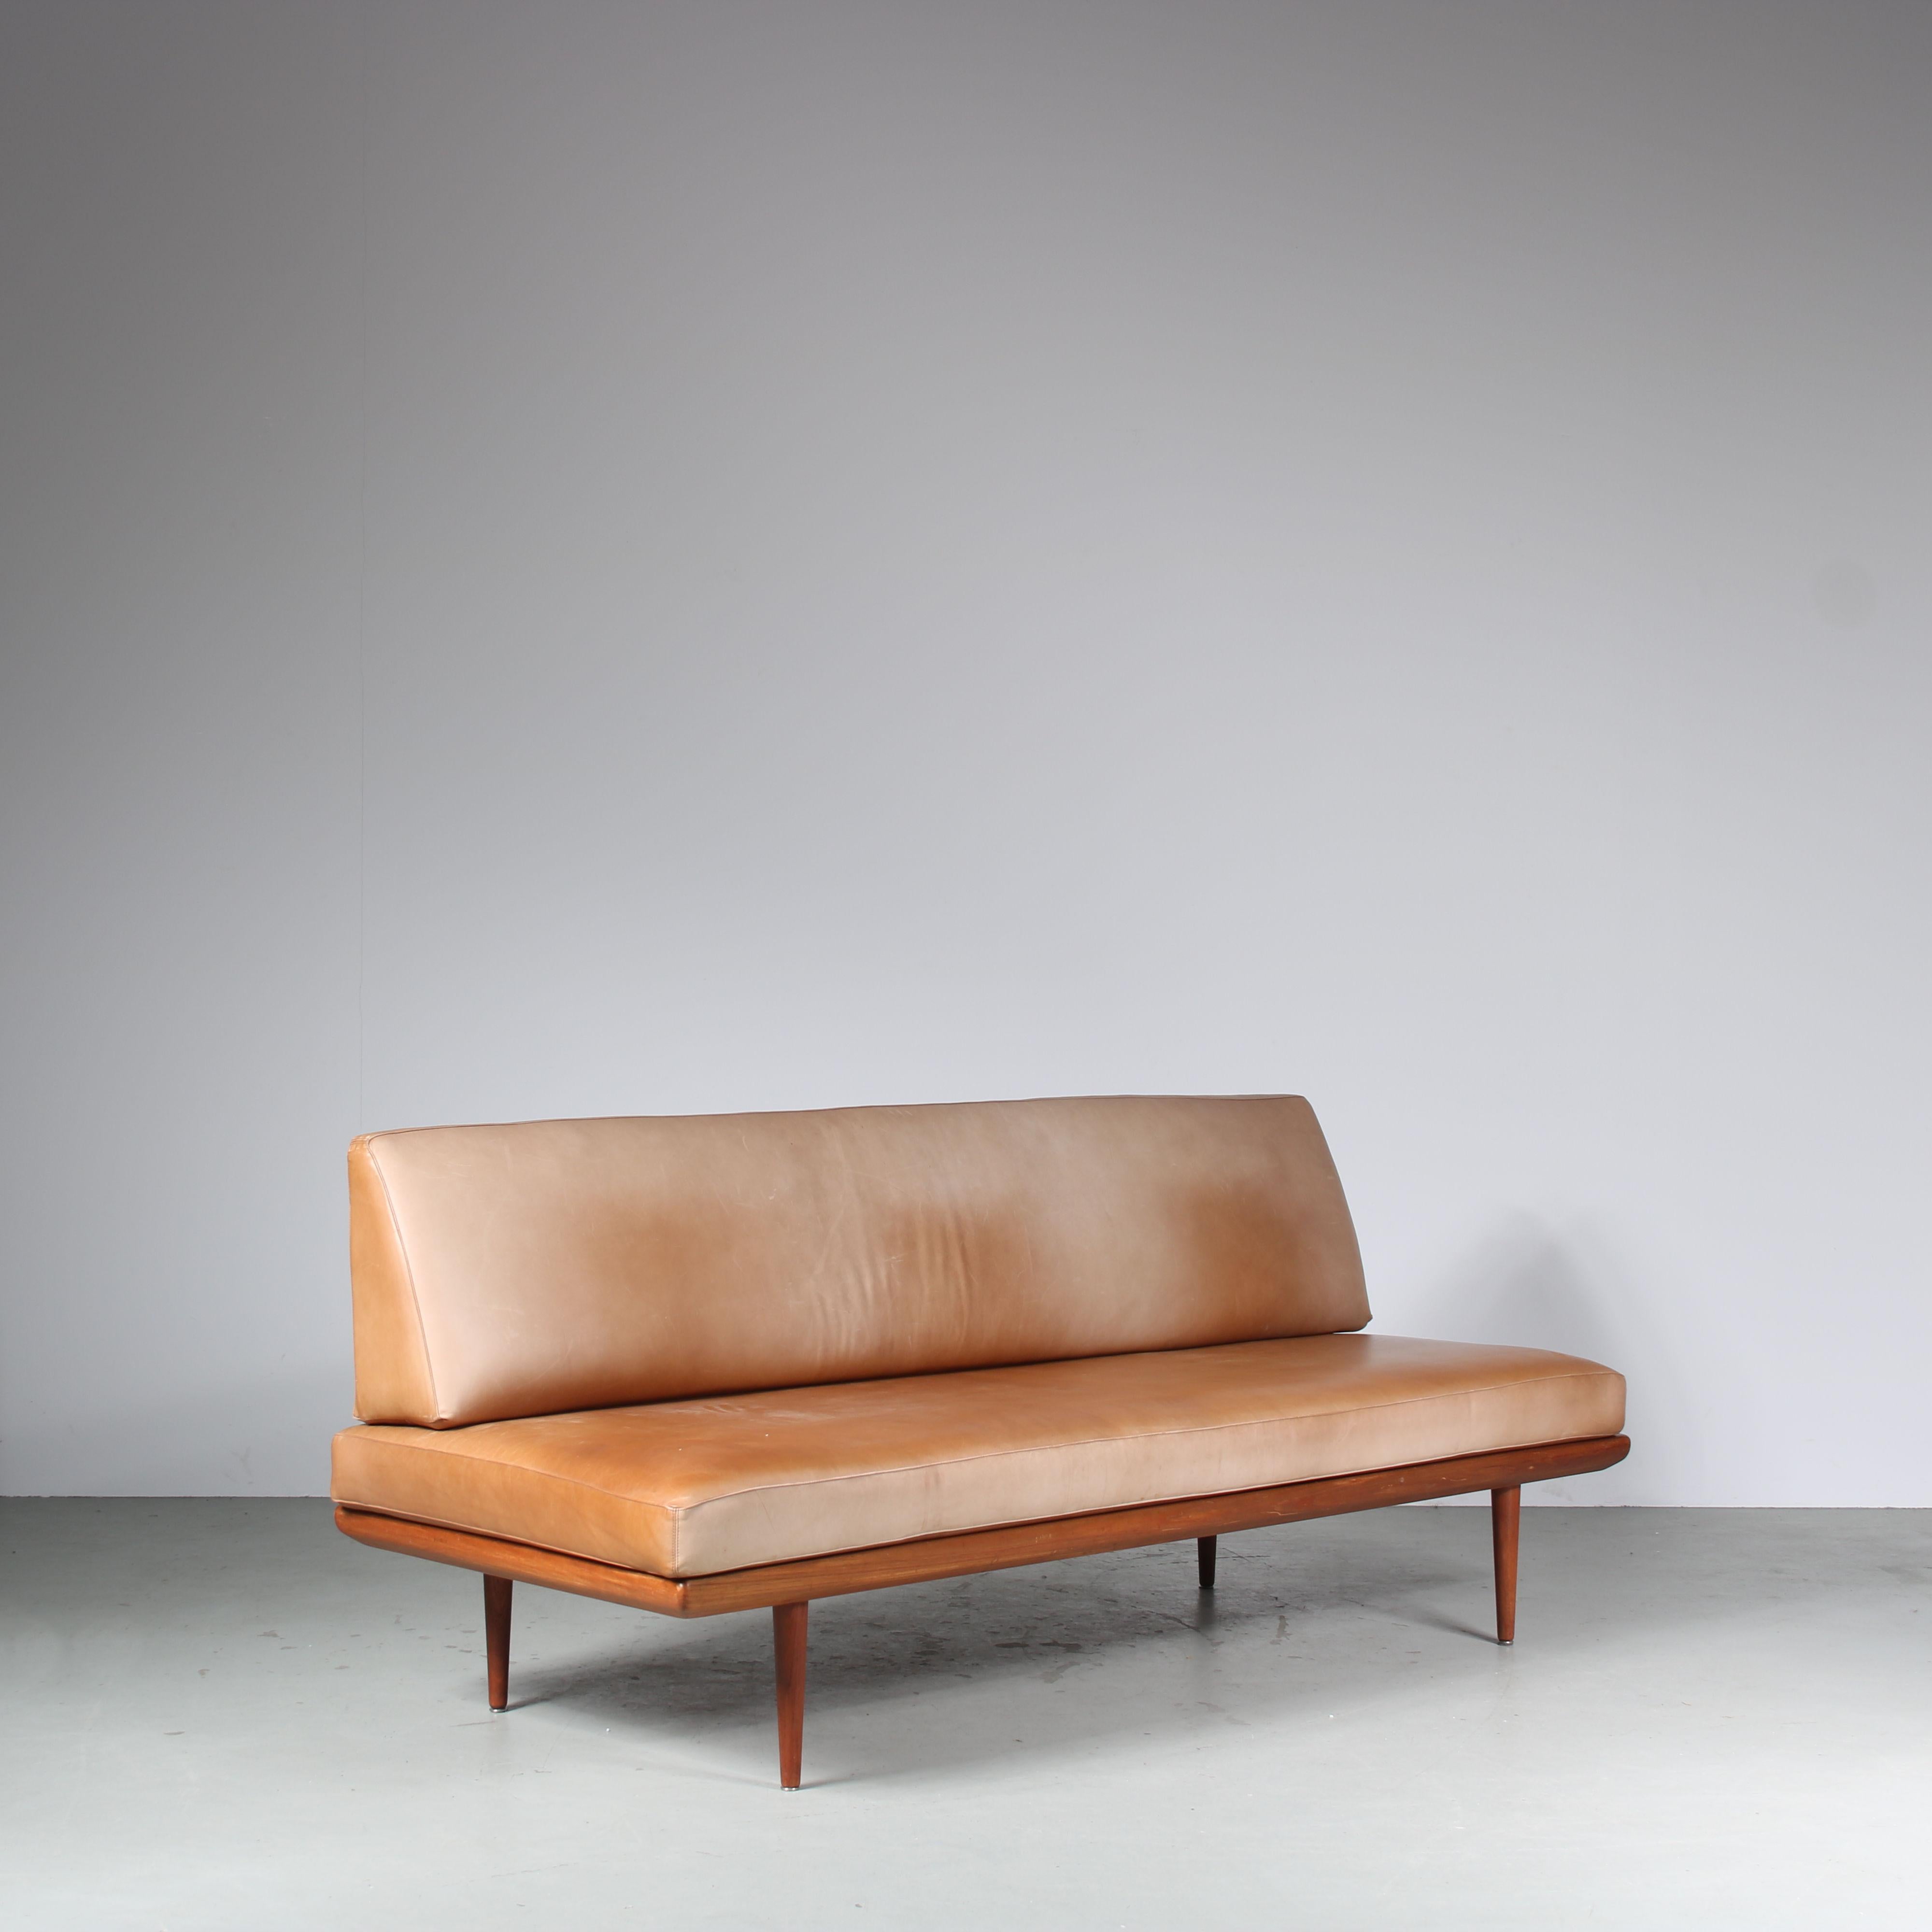 A wonderful sofa / daybed, model “Minerva”, designed by Peter Hvidt & Orla Mølgaard and manufactured by France & Son in Denmark around 1950.

Made of high quality teak wood in a beautiful warm brown colour with elegant finish and gently tapered